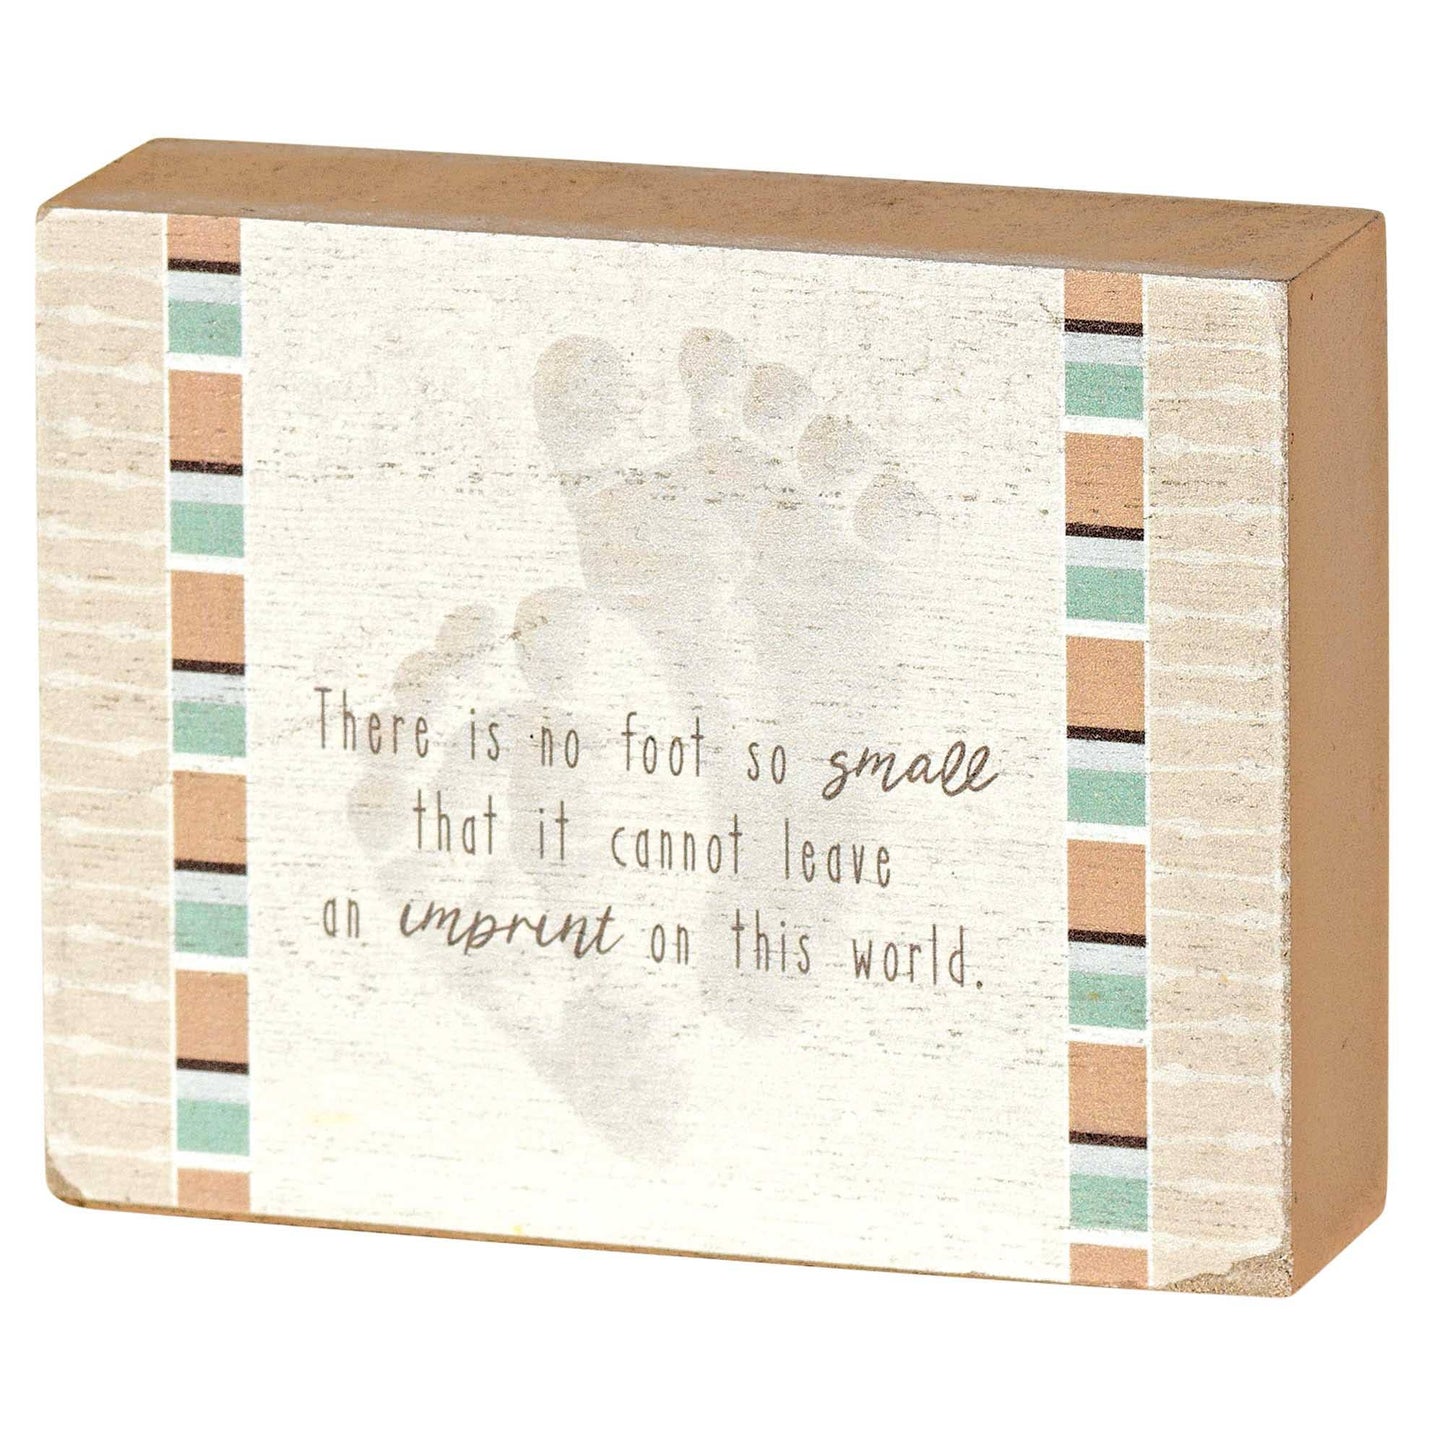 Dicksons - Tabletop Plaque Baby No Foot Small 4x3